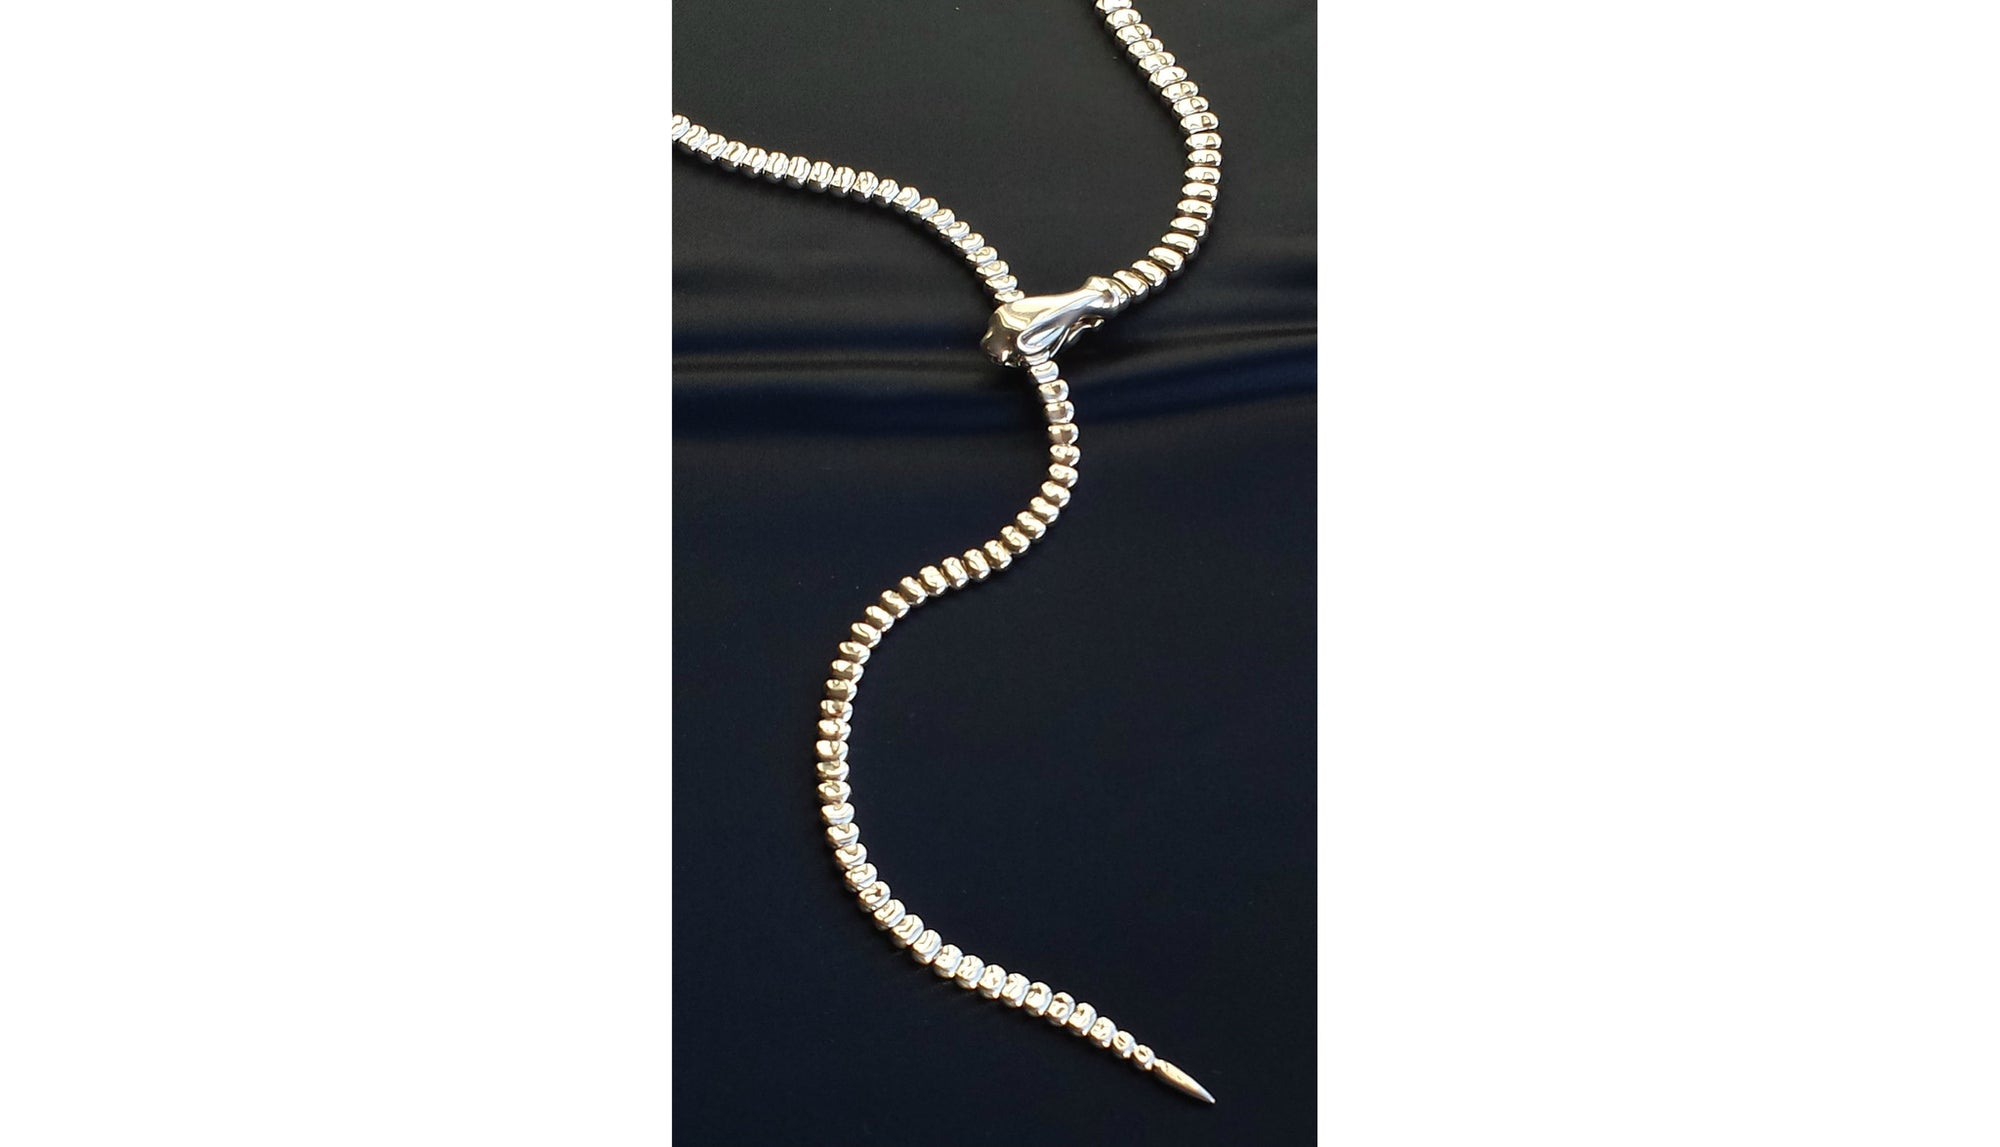 Tiffany & Co. Sterling Silver 28 inch Serpent / Snake Necklace by Peretti, with Box & Case